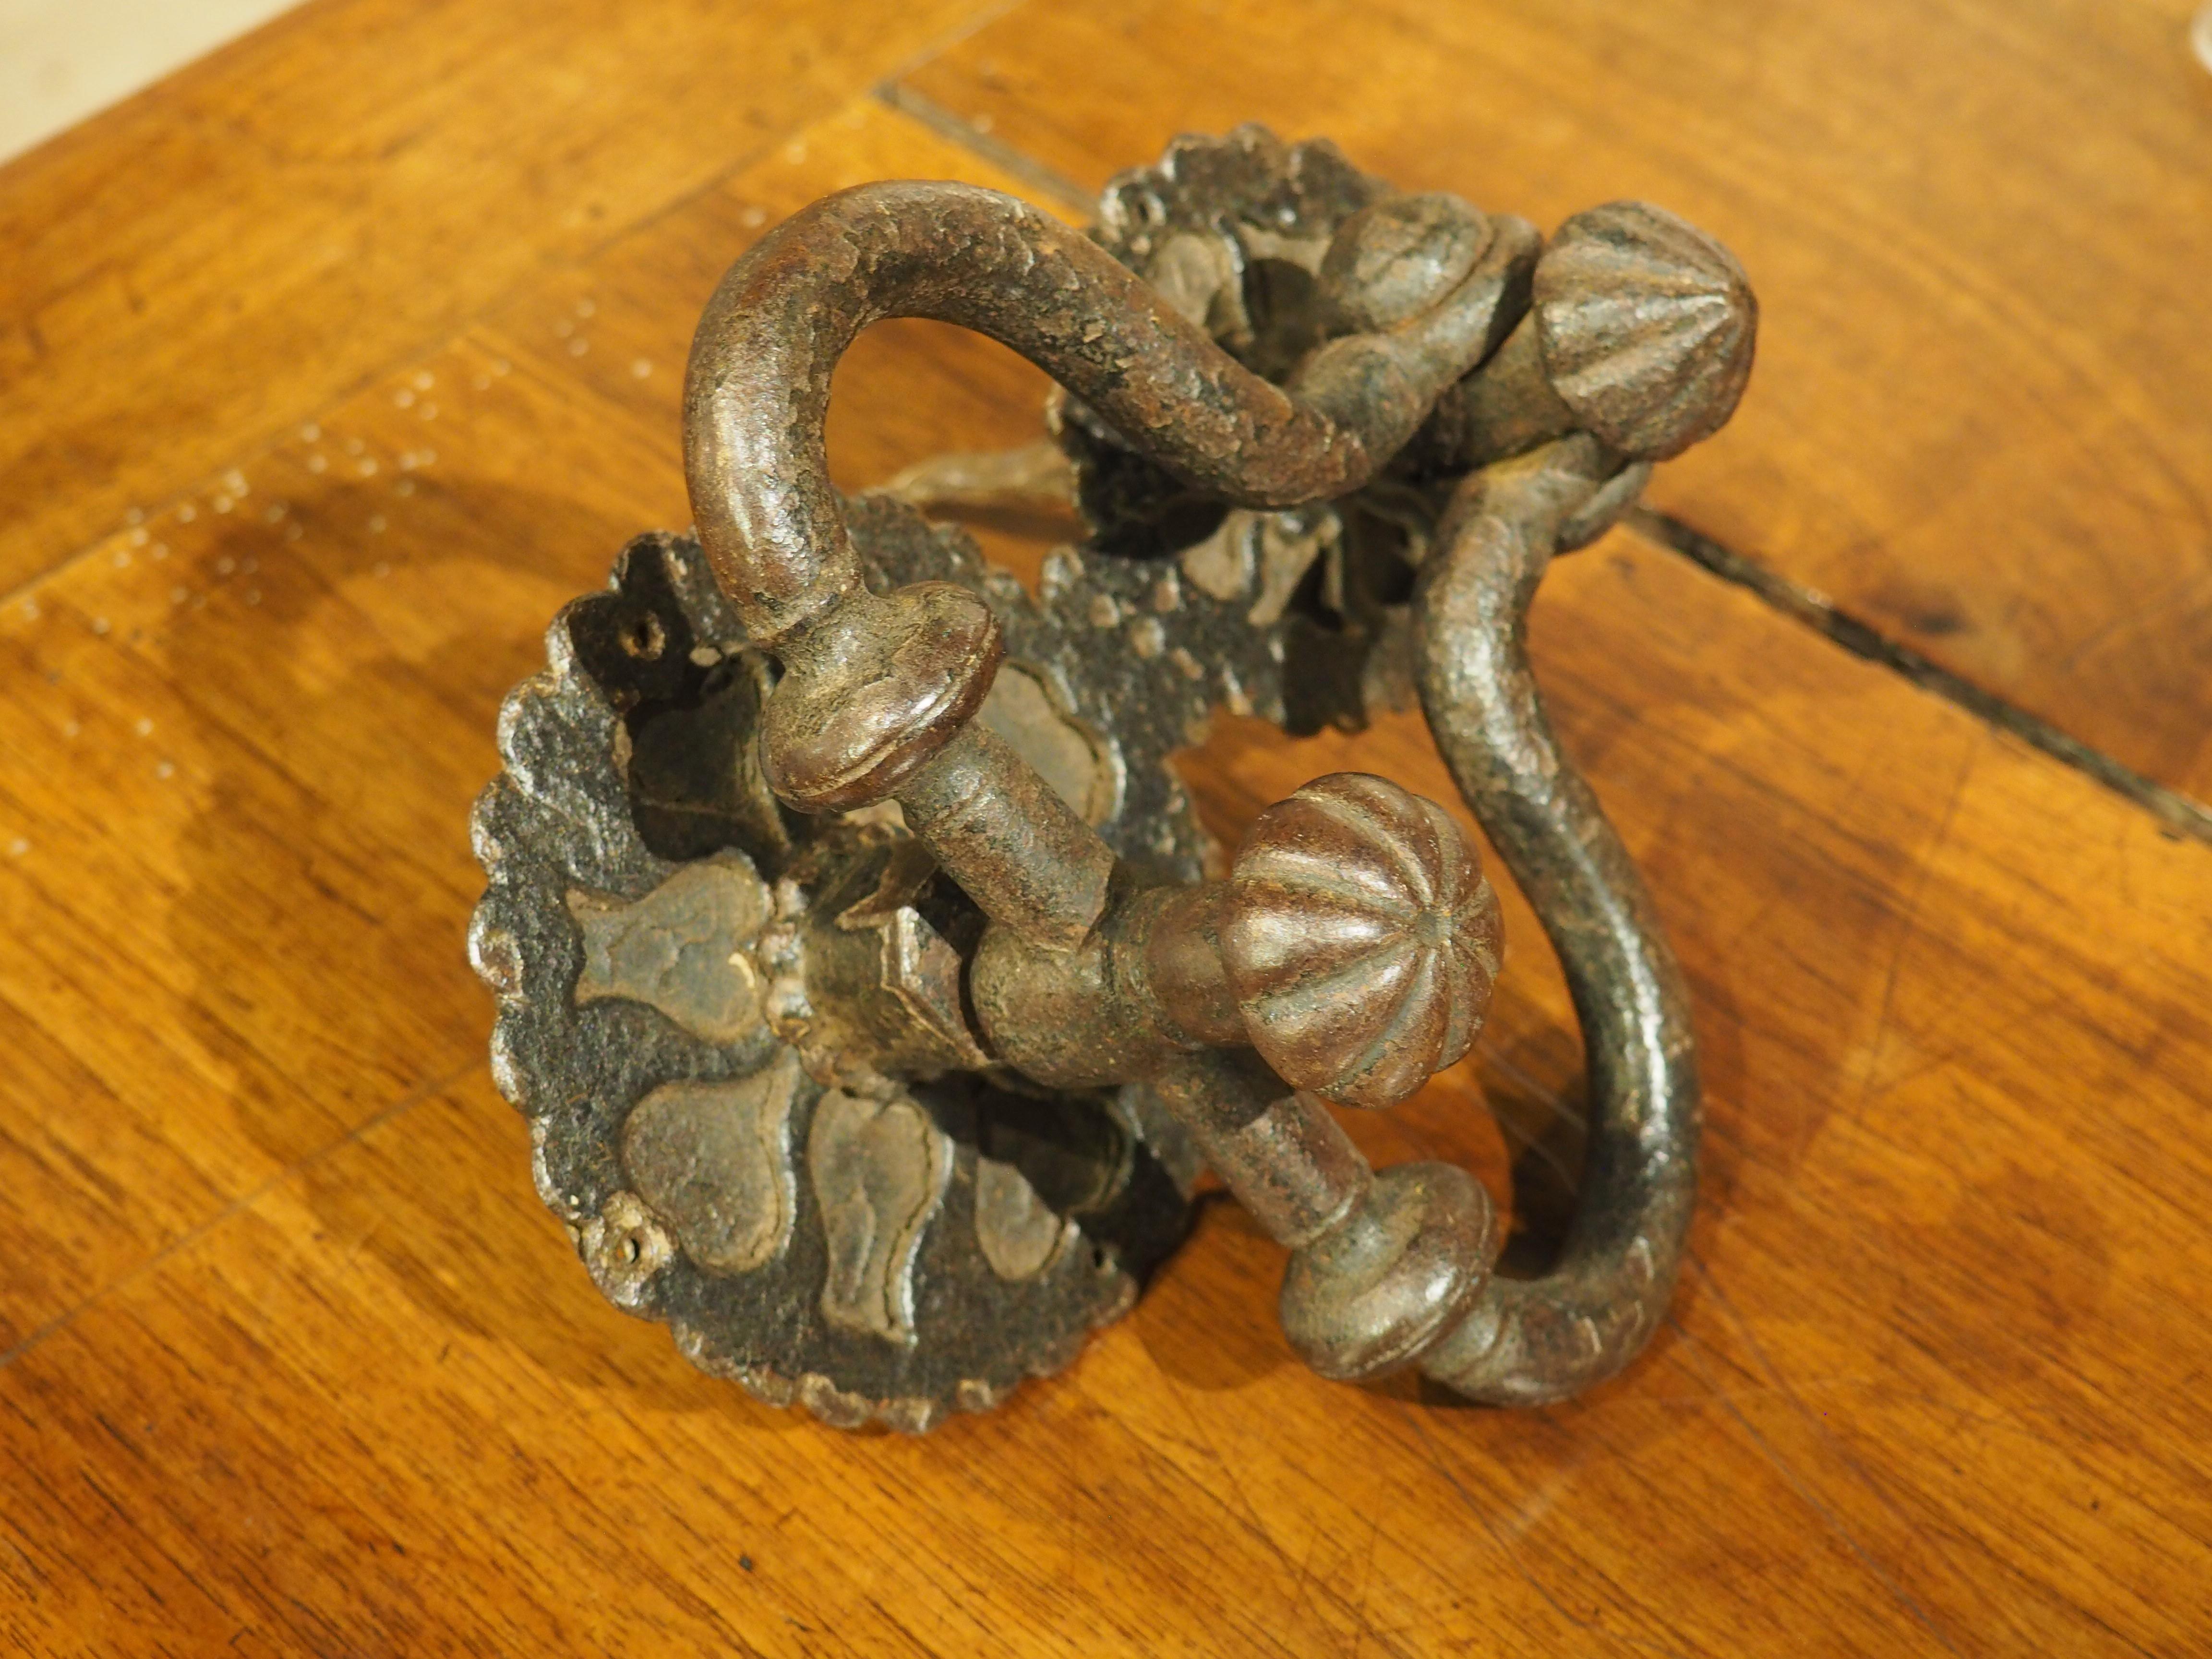 Up until the 16th century, door knockers were typically large iron rings that resembled the knockers used in ancient Greece and Rome. During the 1500’s, blacksmiths began to craft more elaborate designs, often reflecting local culture and lore. By